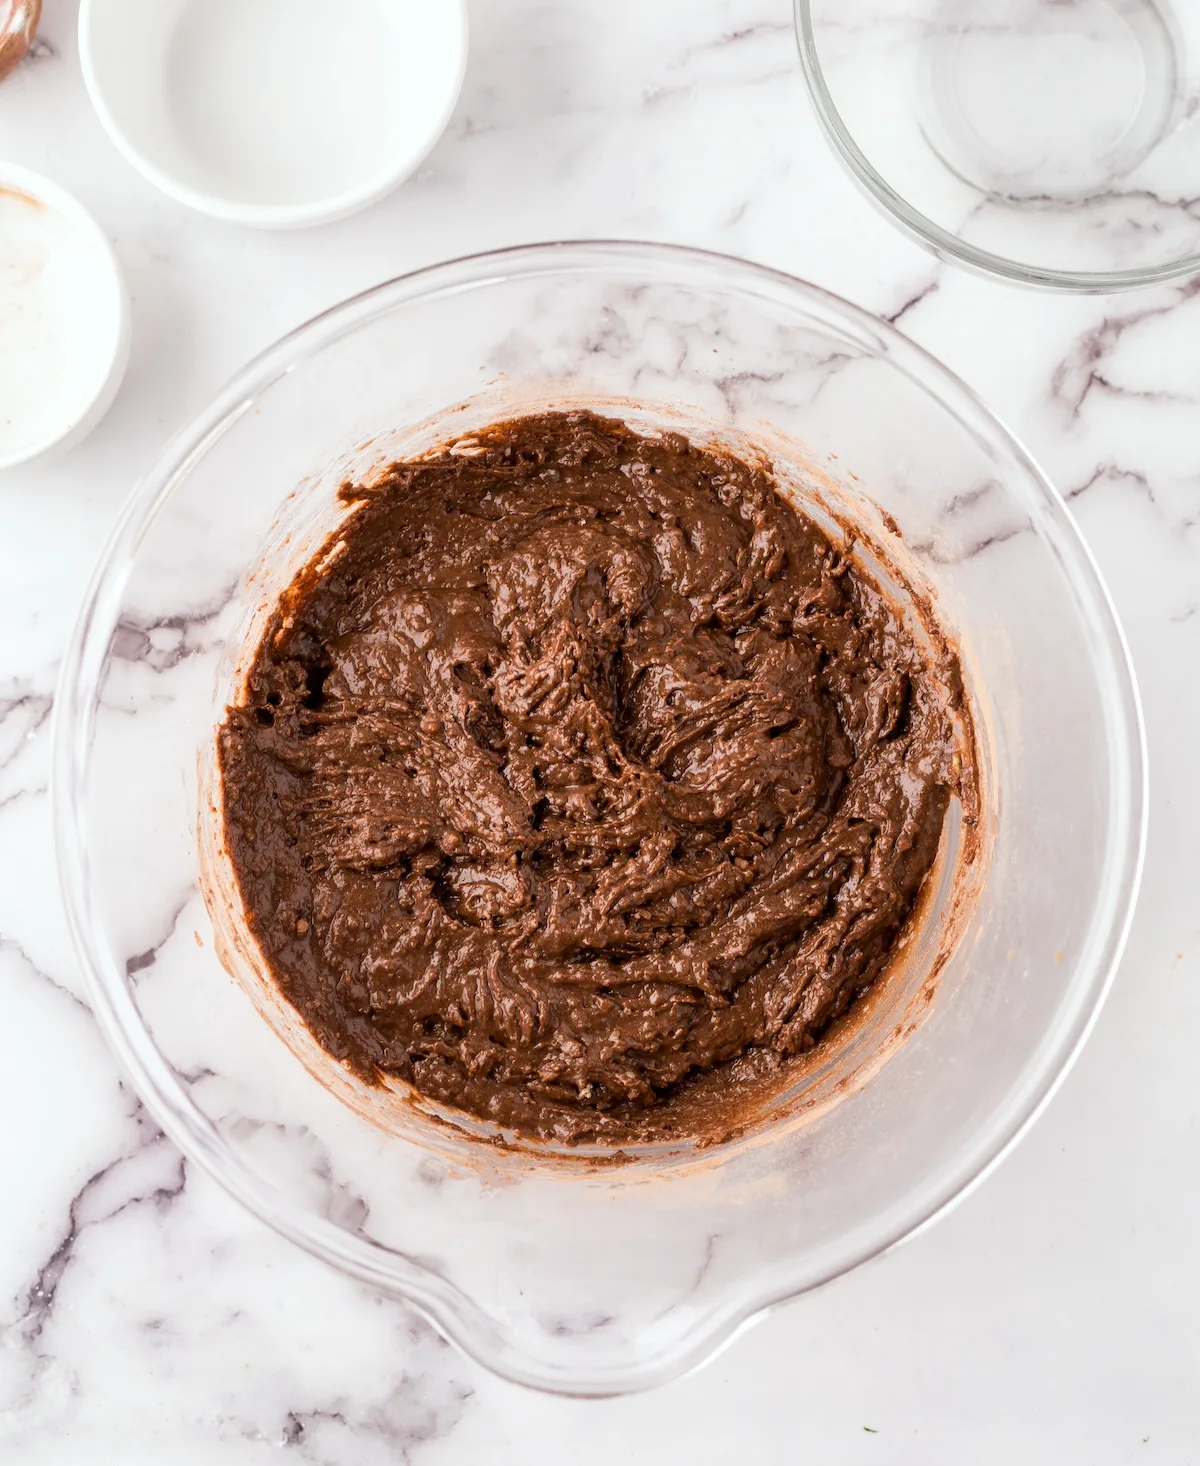 Flour, cocoa powder, sugar, and baking soda mixed with the wet ingredients in the bowl